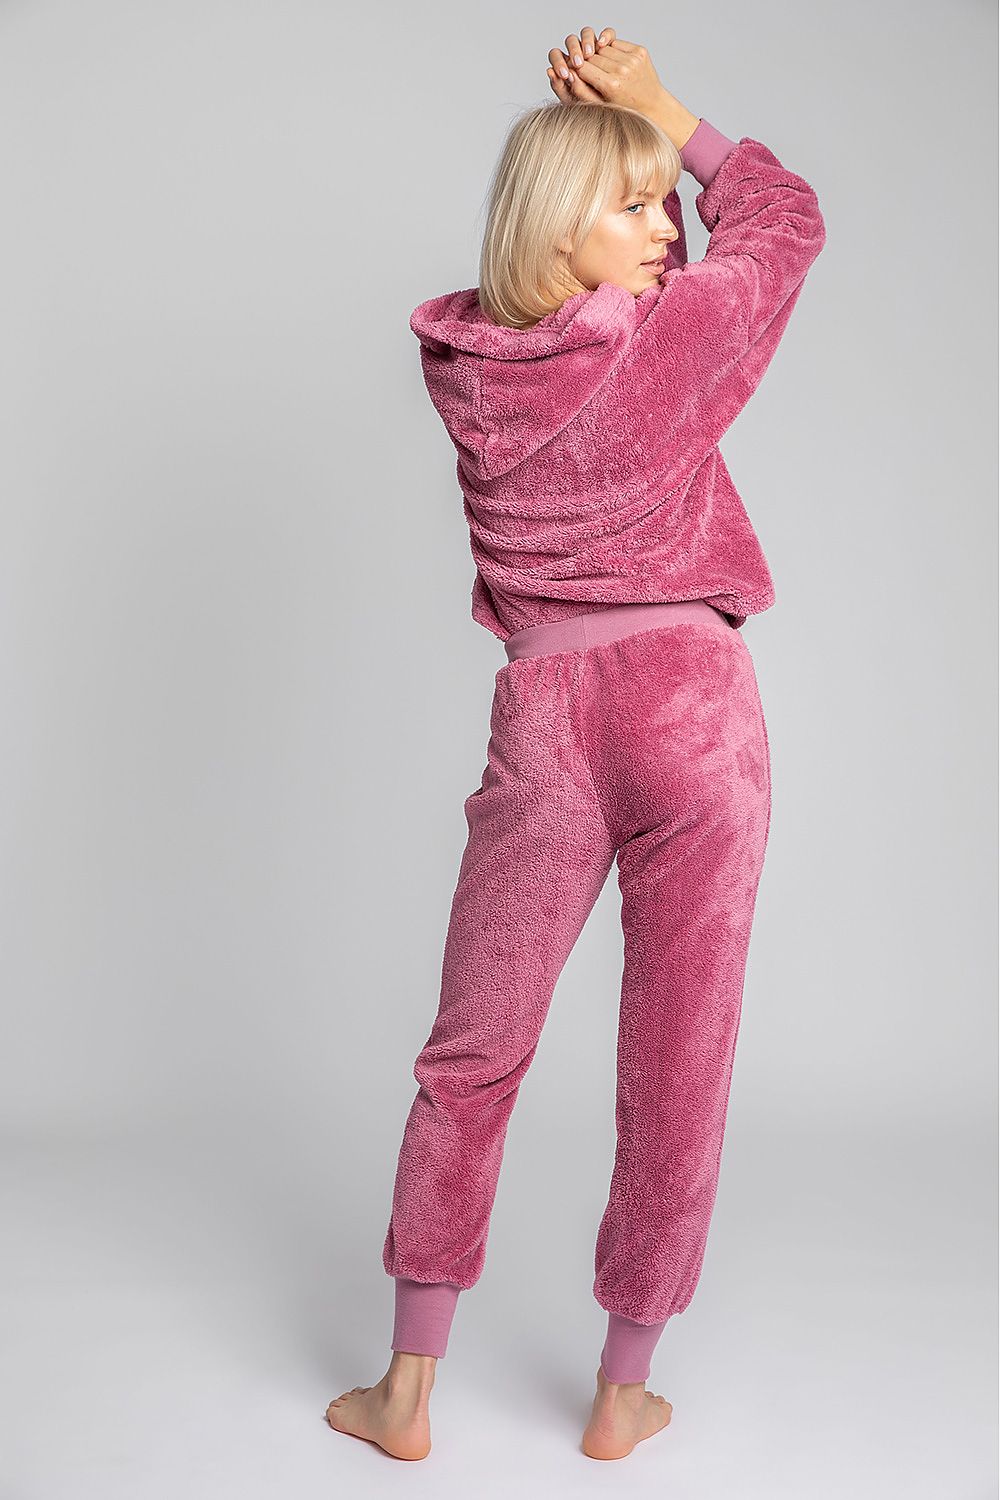 These heavenly lightweight joggers in plush knit will make lazy moments at home more enjoyable and are perfect for a walk when it's chilly outside. Colour: pink.